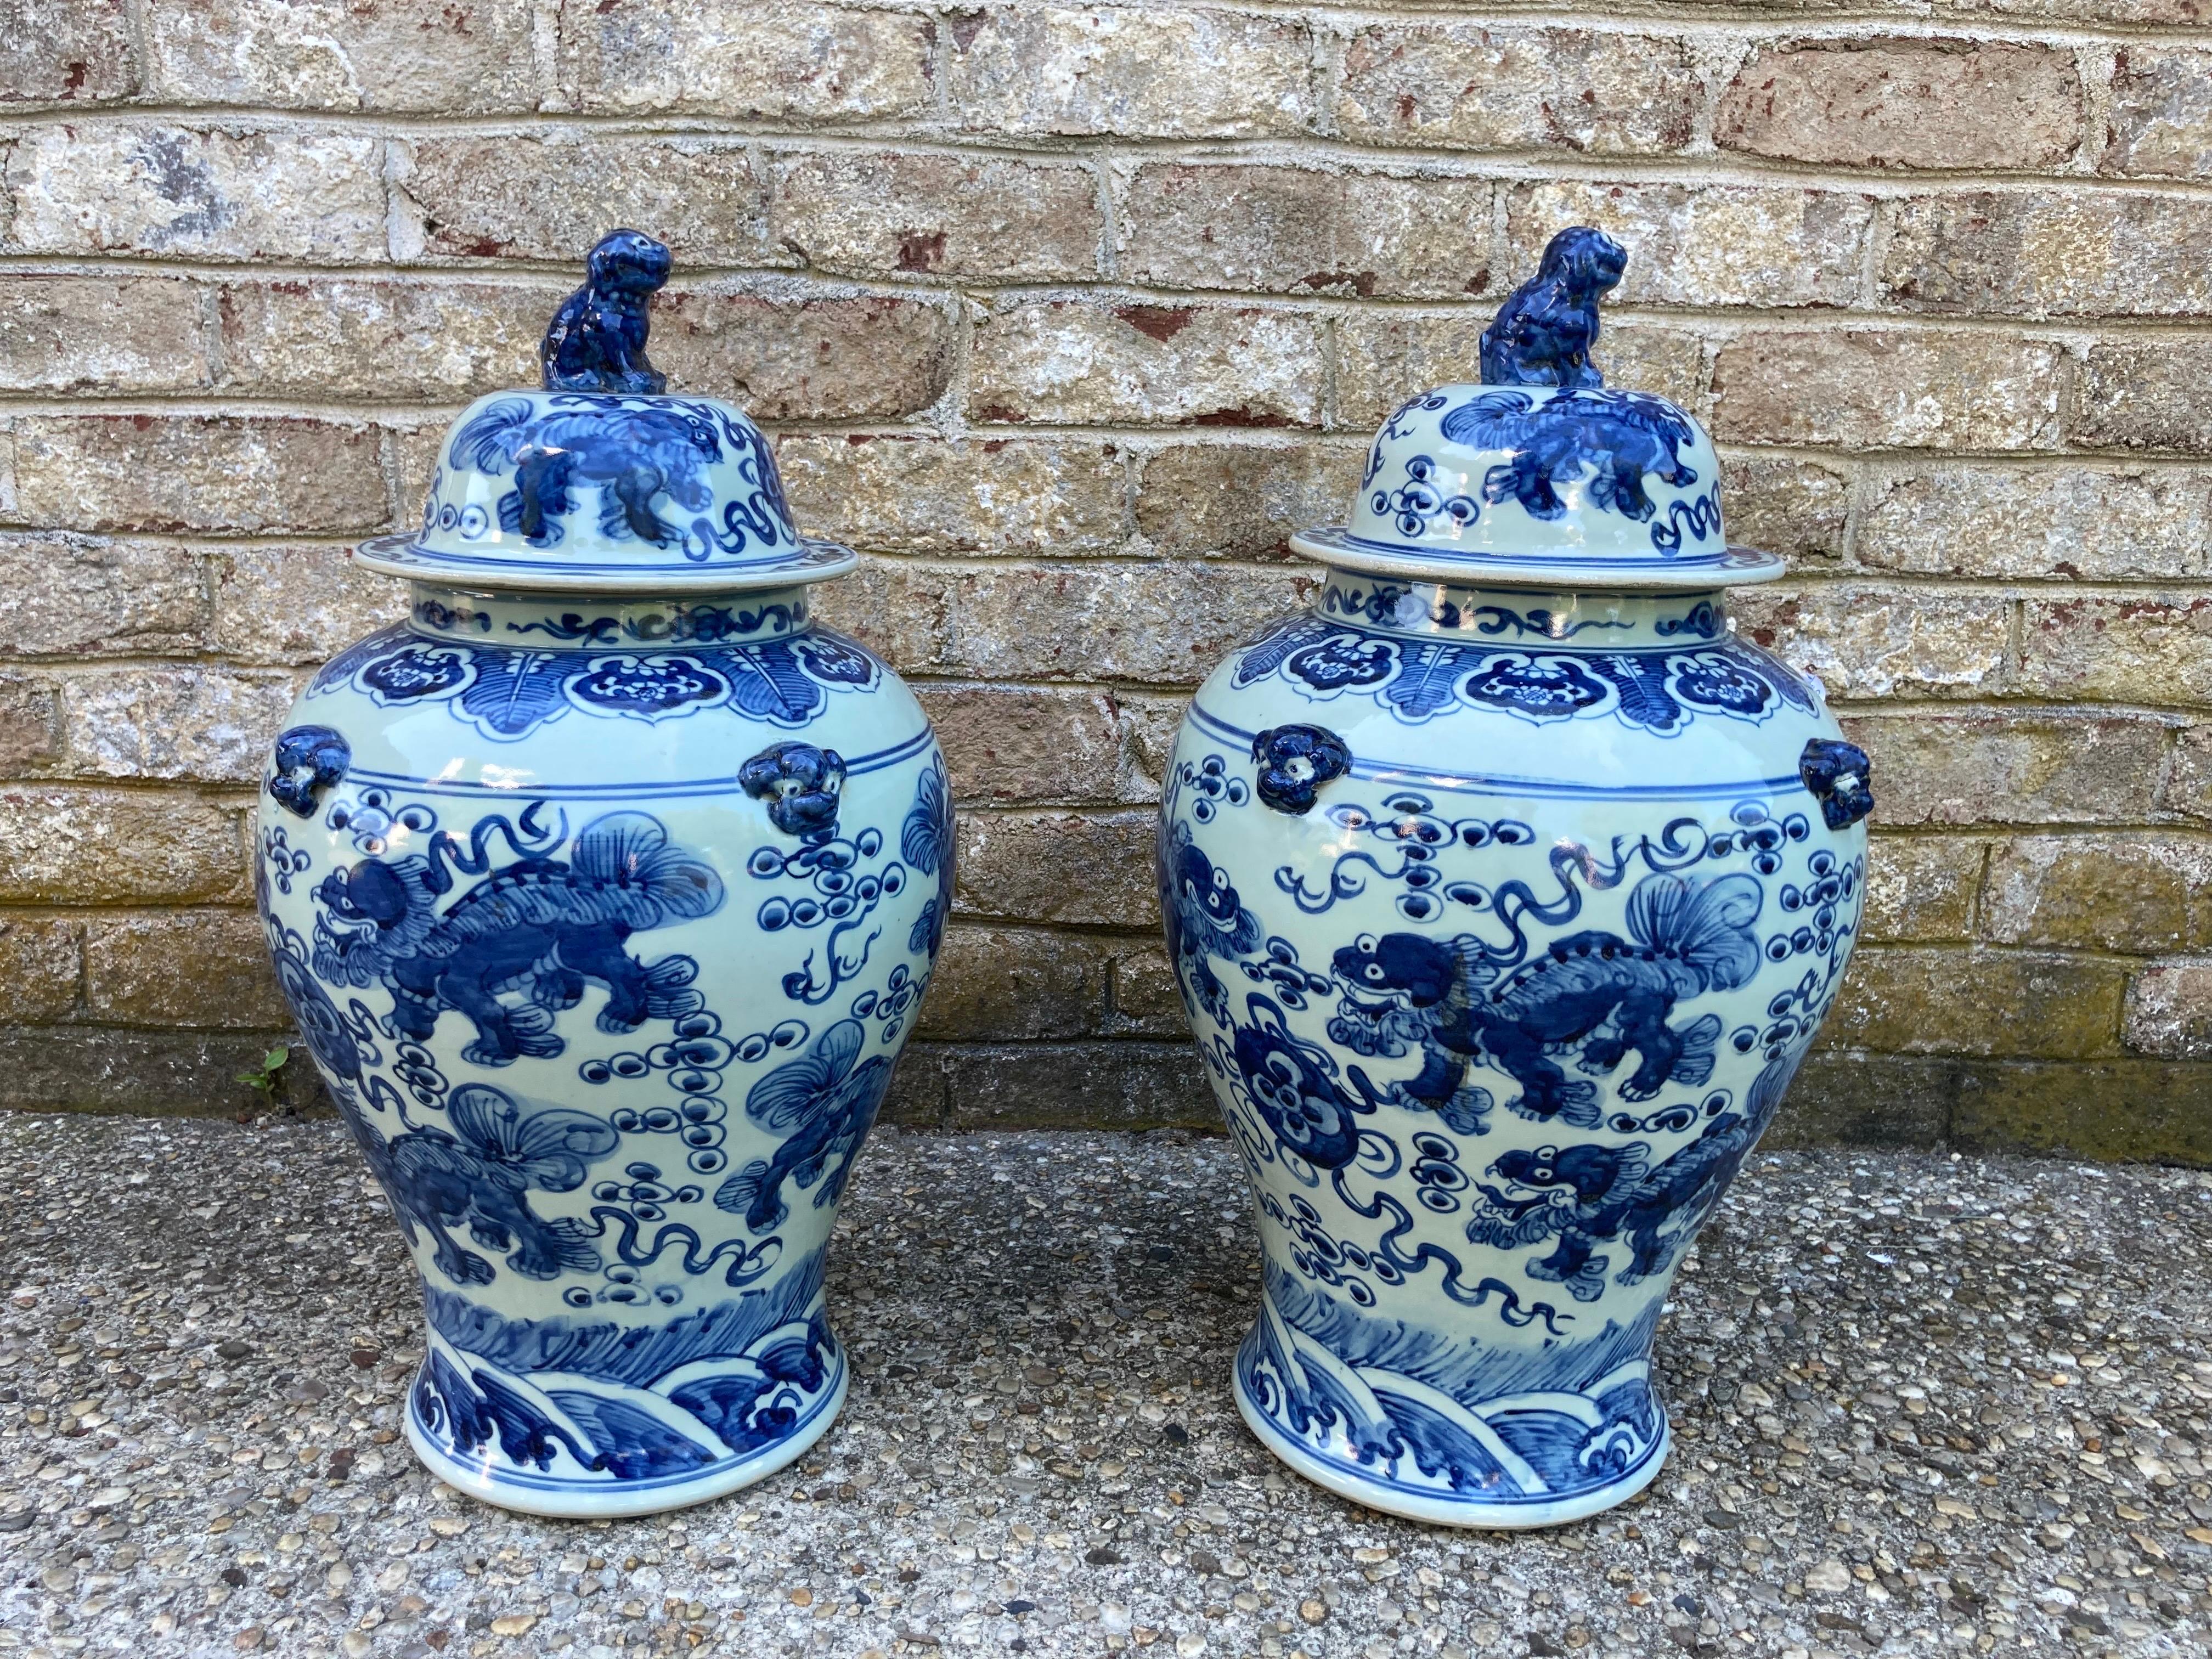 Great pair of Chinese blue and white jars with lids...... foo dogs painted on the sides of the jars as well as figures on the lids.... 